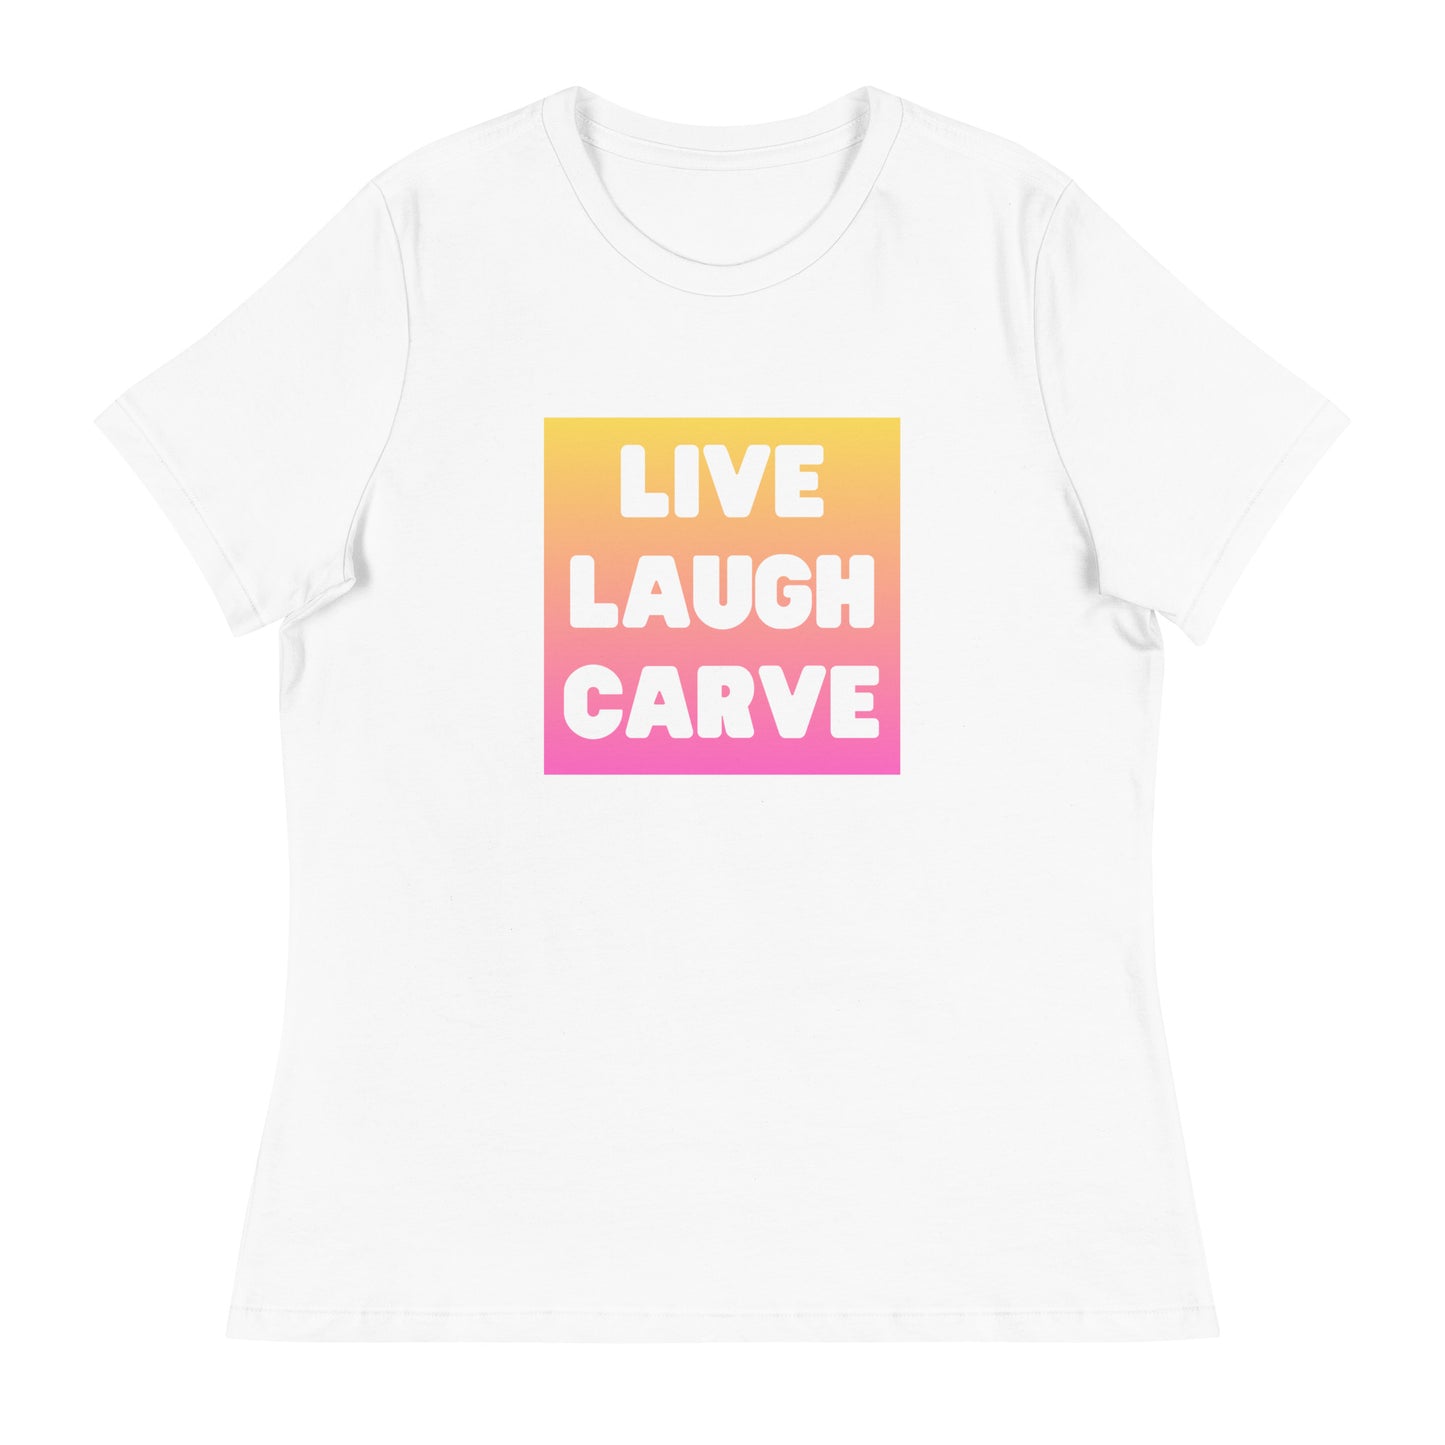 Live Laugh Carve - Women's Relaxed T-Shirt